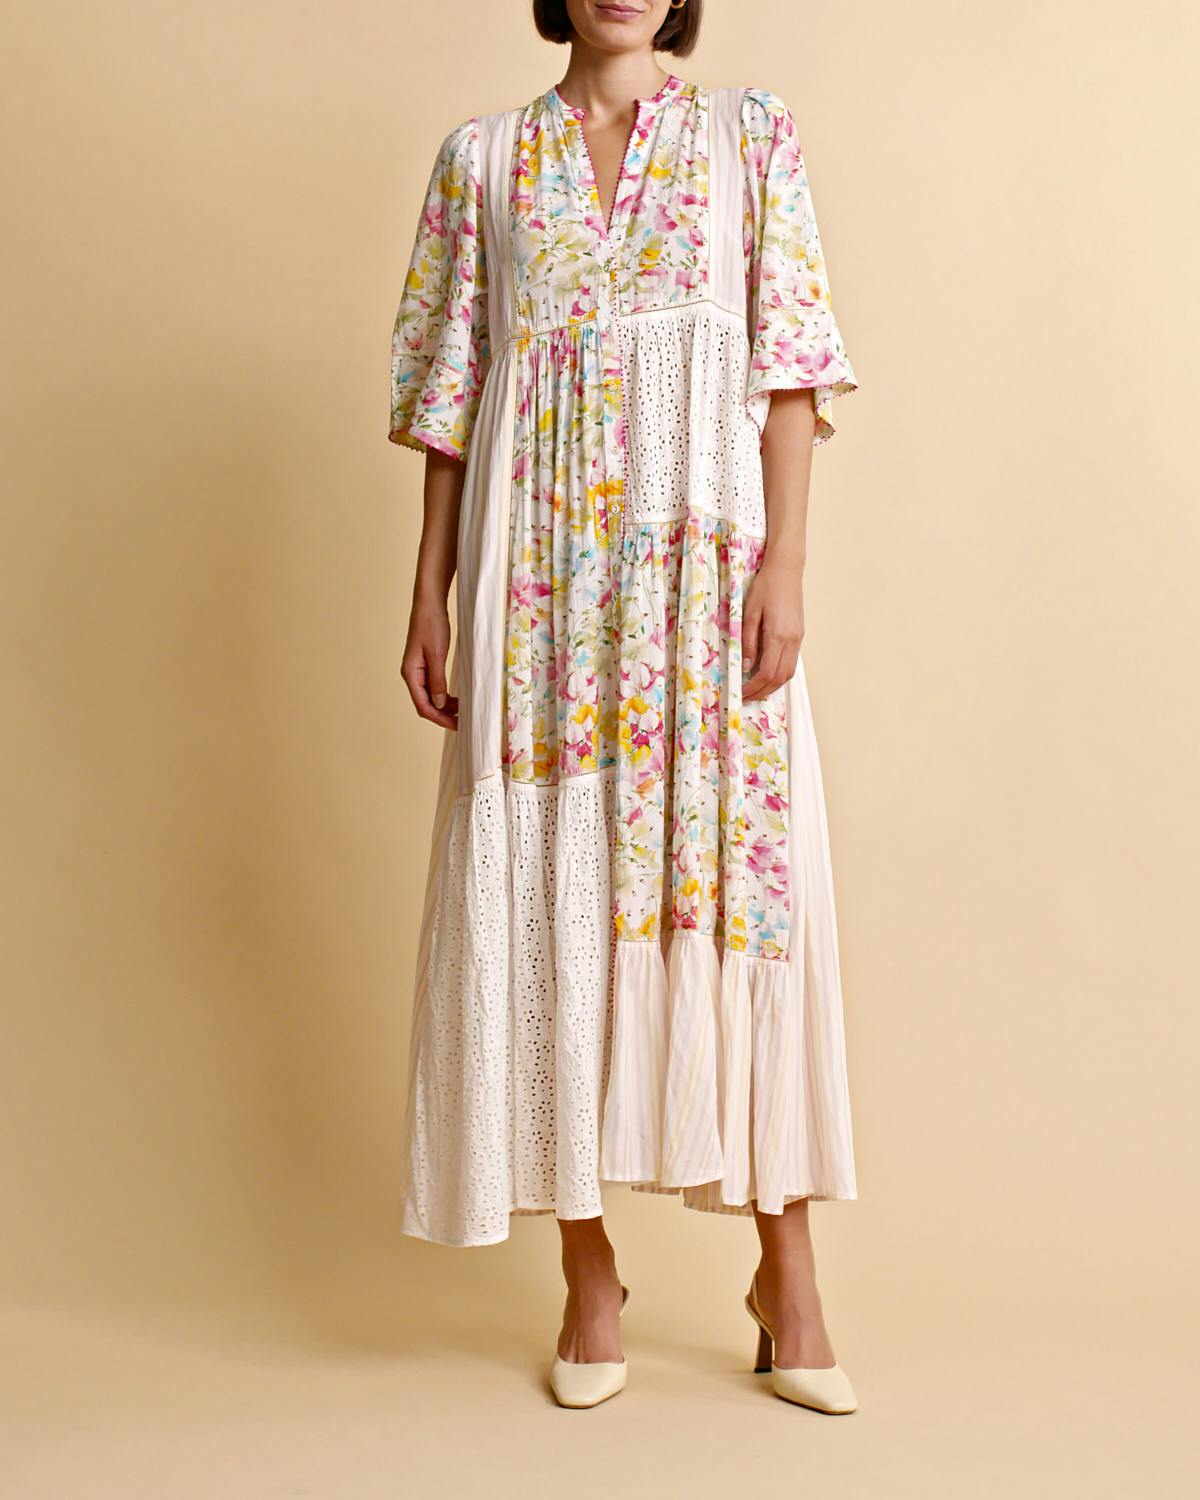 Patchwork Maxi Dress, Bright Flowers. Image #6